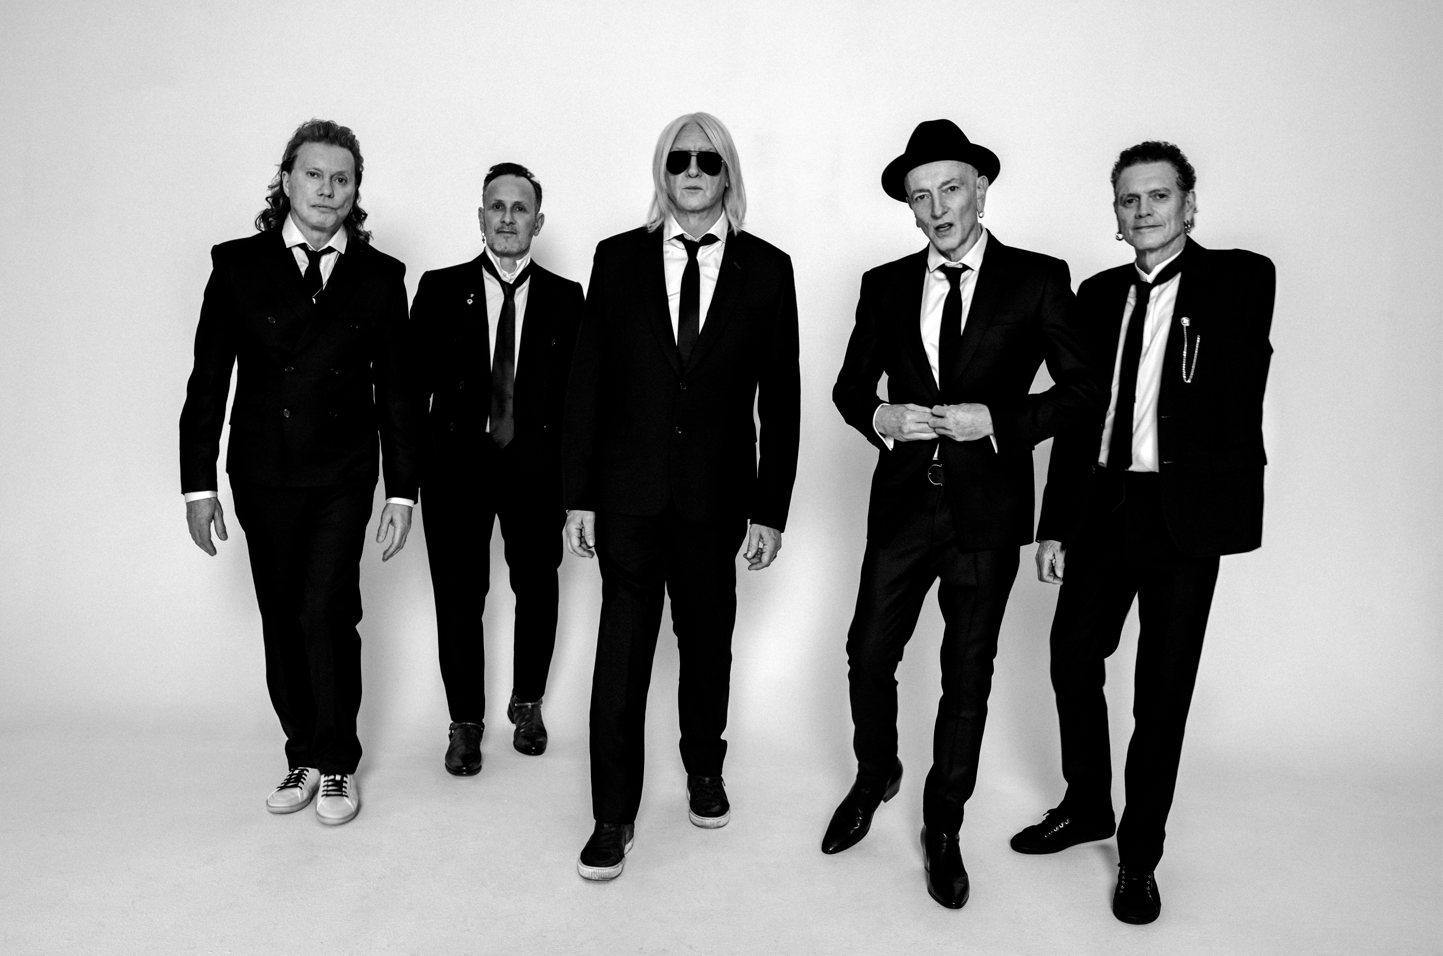 Hall Of Fame Legends Def Leppard And Brit Awards Winner Dave Added To Yasalam After-Race Concerts Line-Up For Record-Breaking #ABUDHABIGP 2022